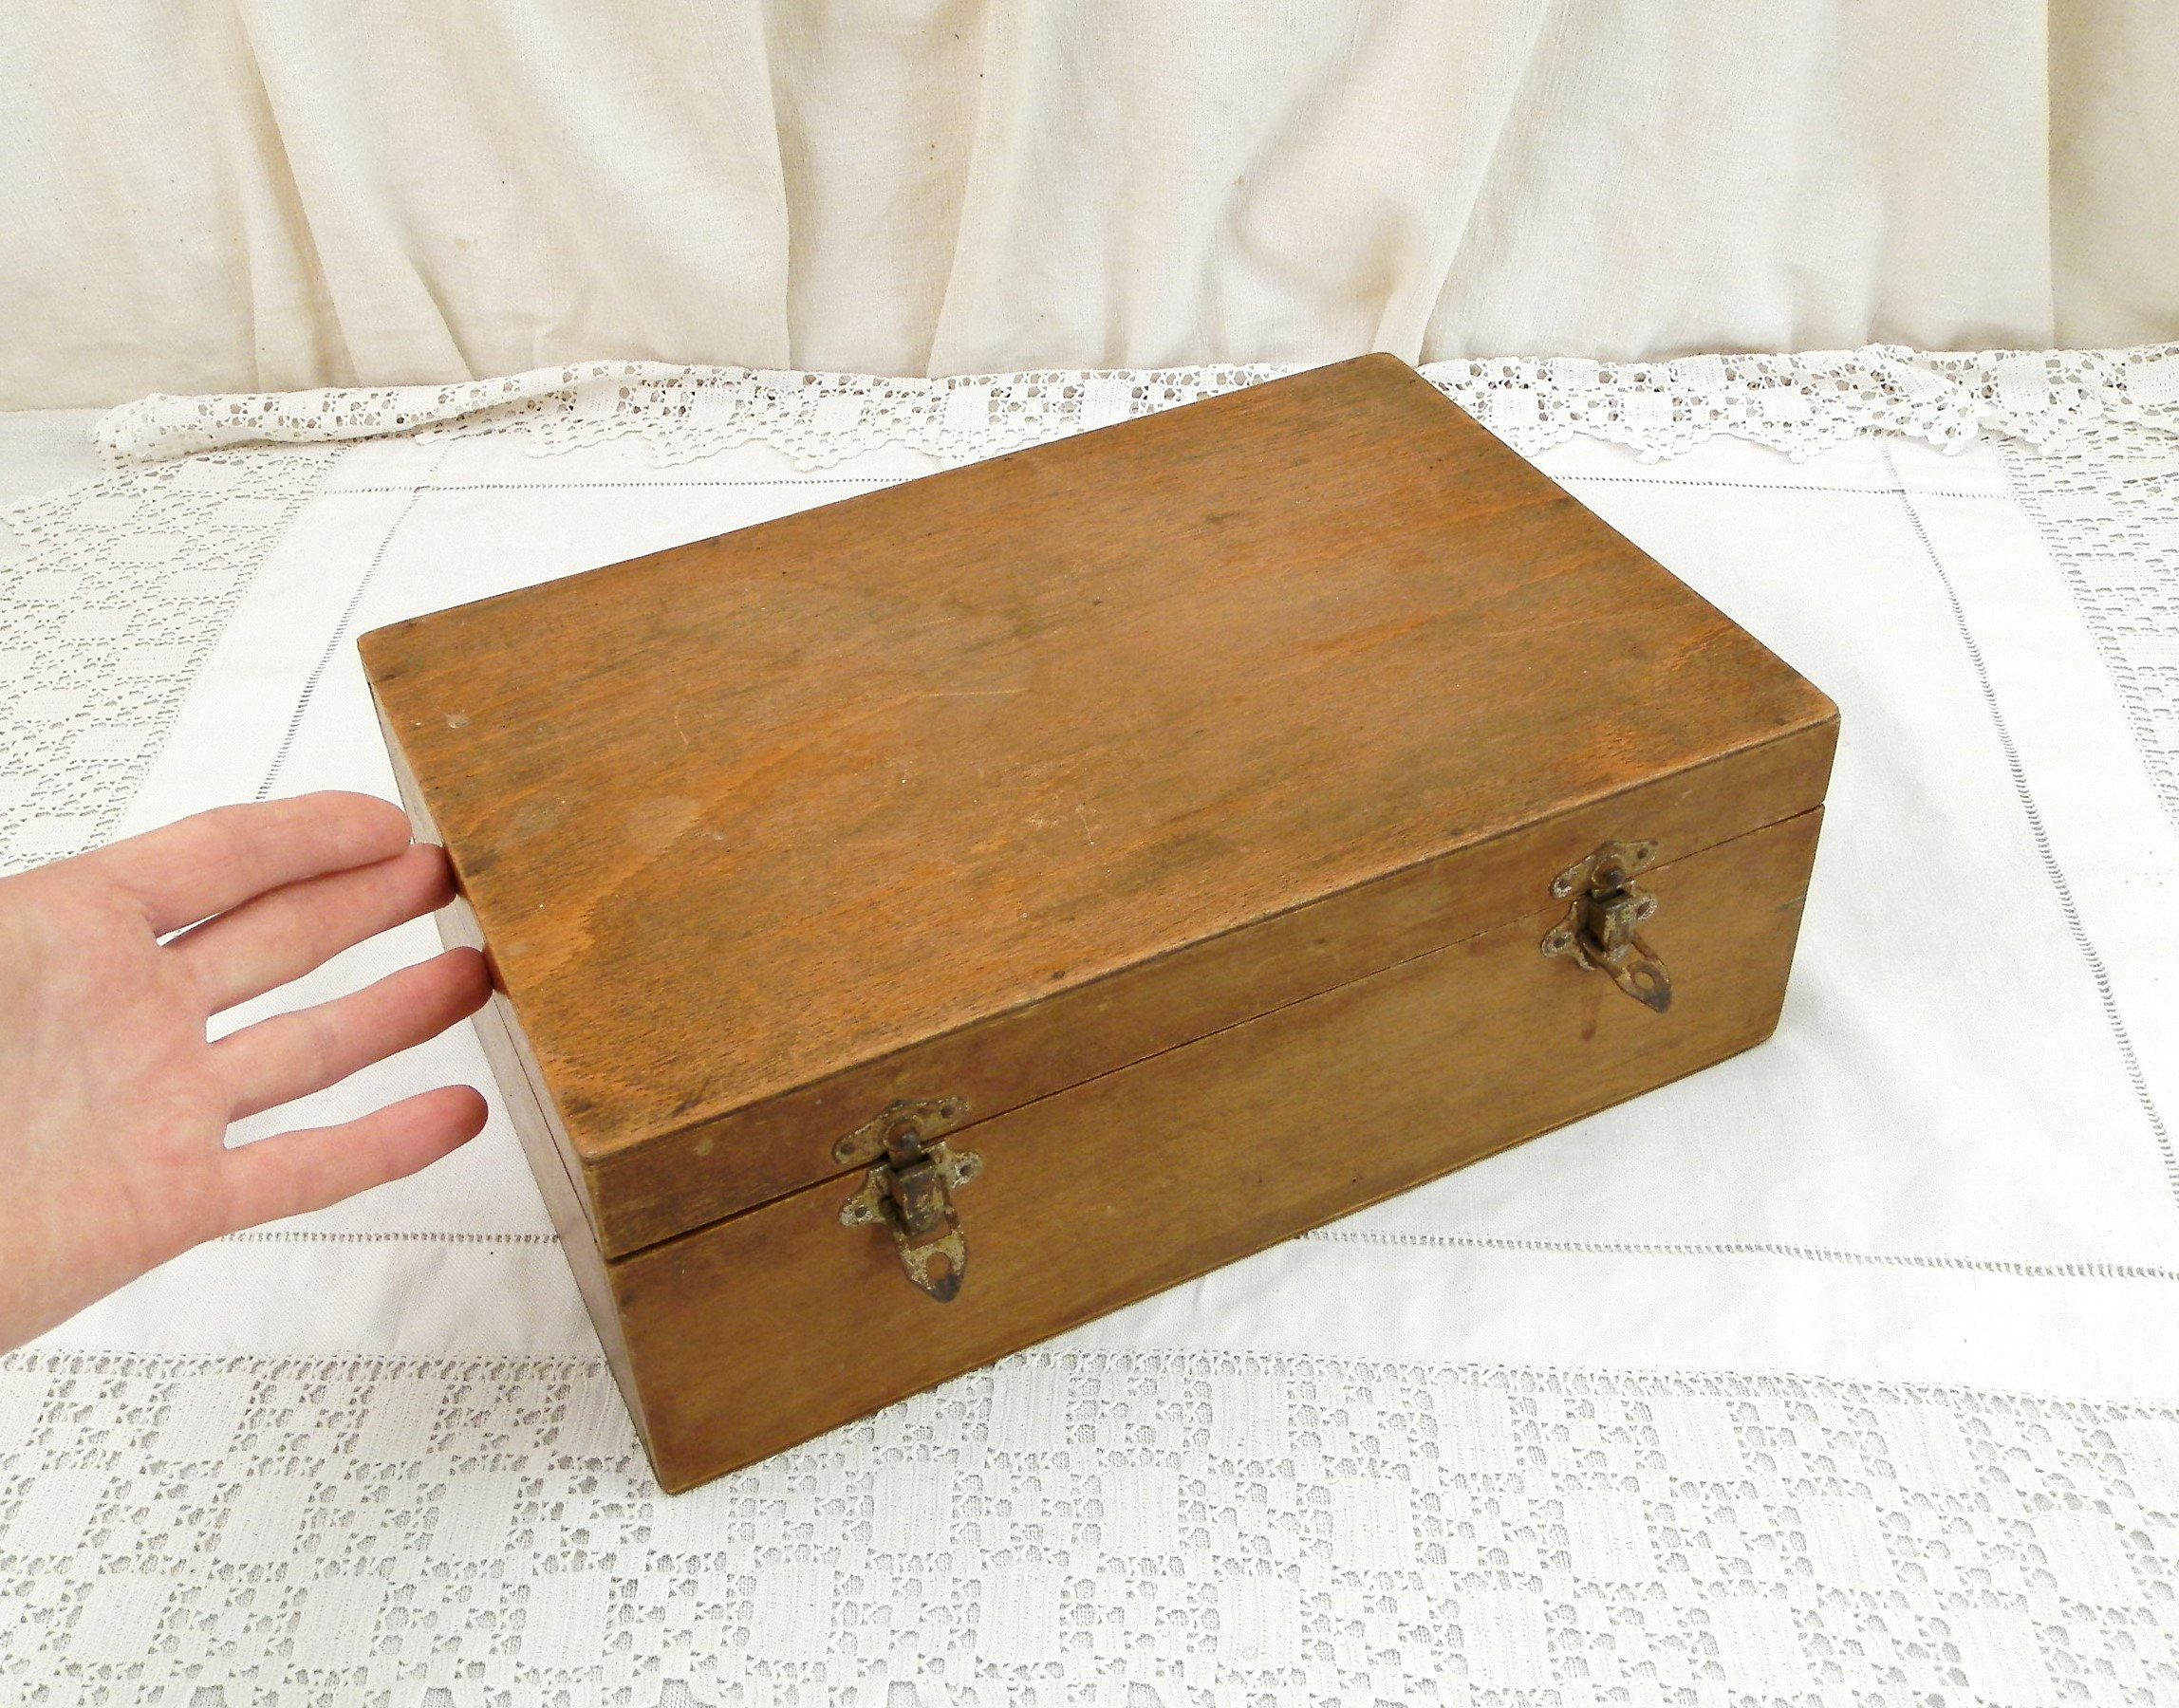 Antique Wooden Boxes With Lids - 196 For Sale on 1stDibs  decorative wooden  boxes with lids, vintage box with lid, wood box lids